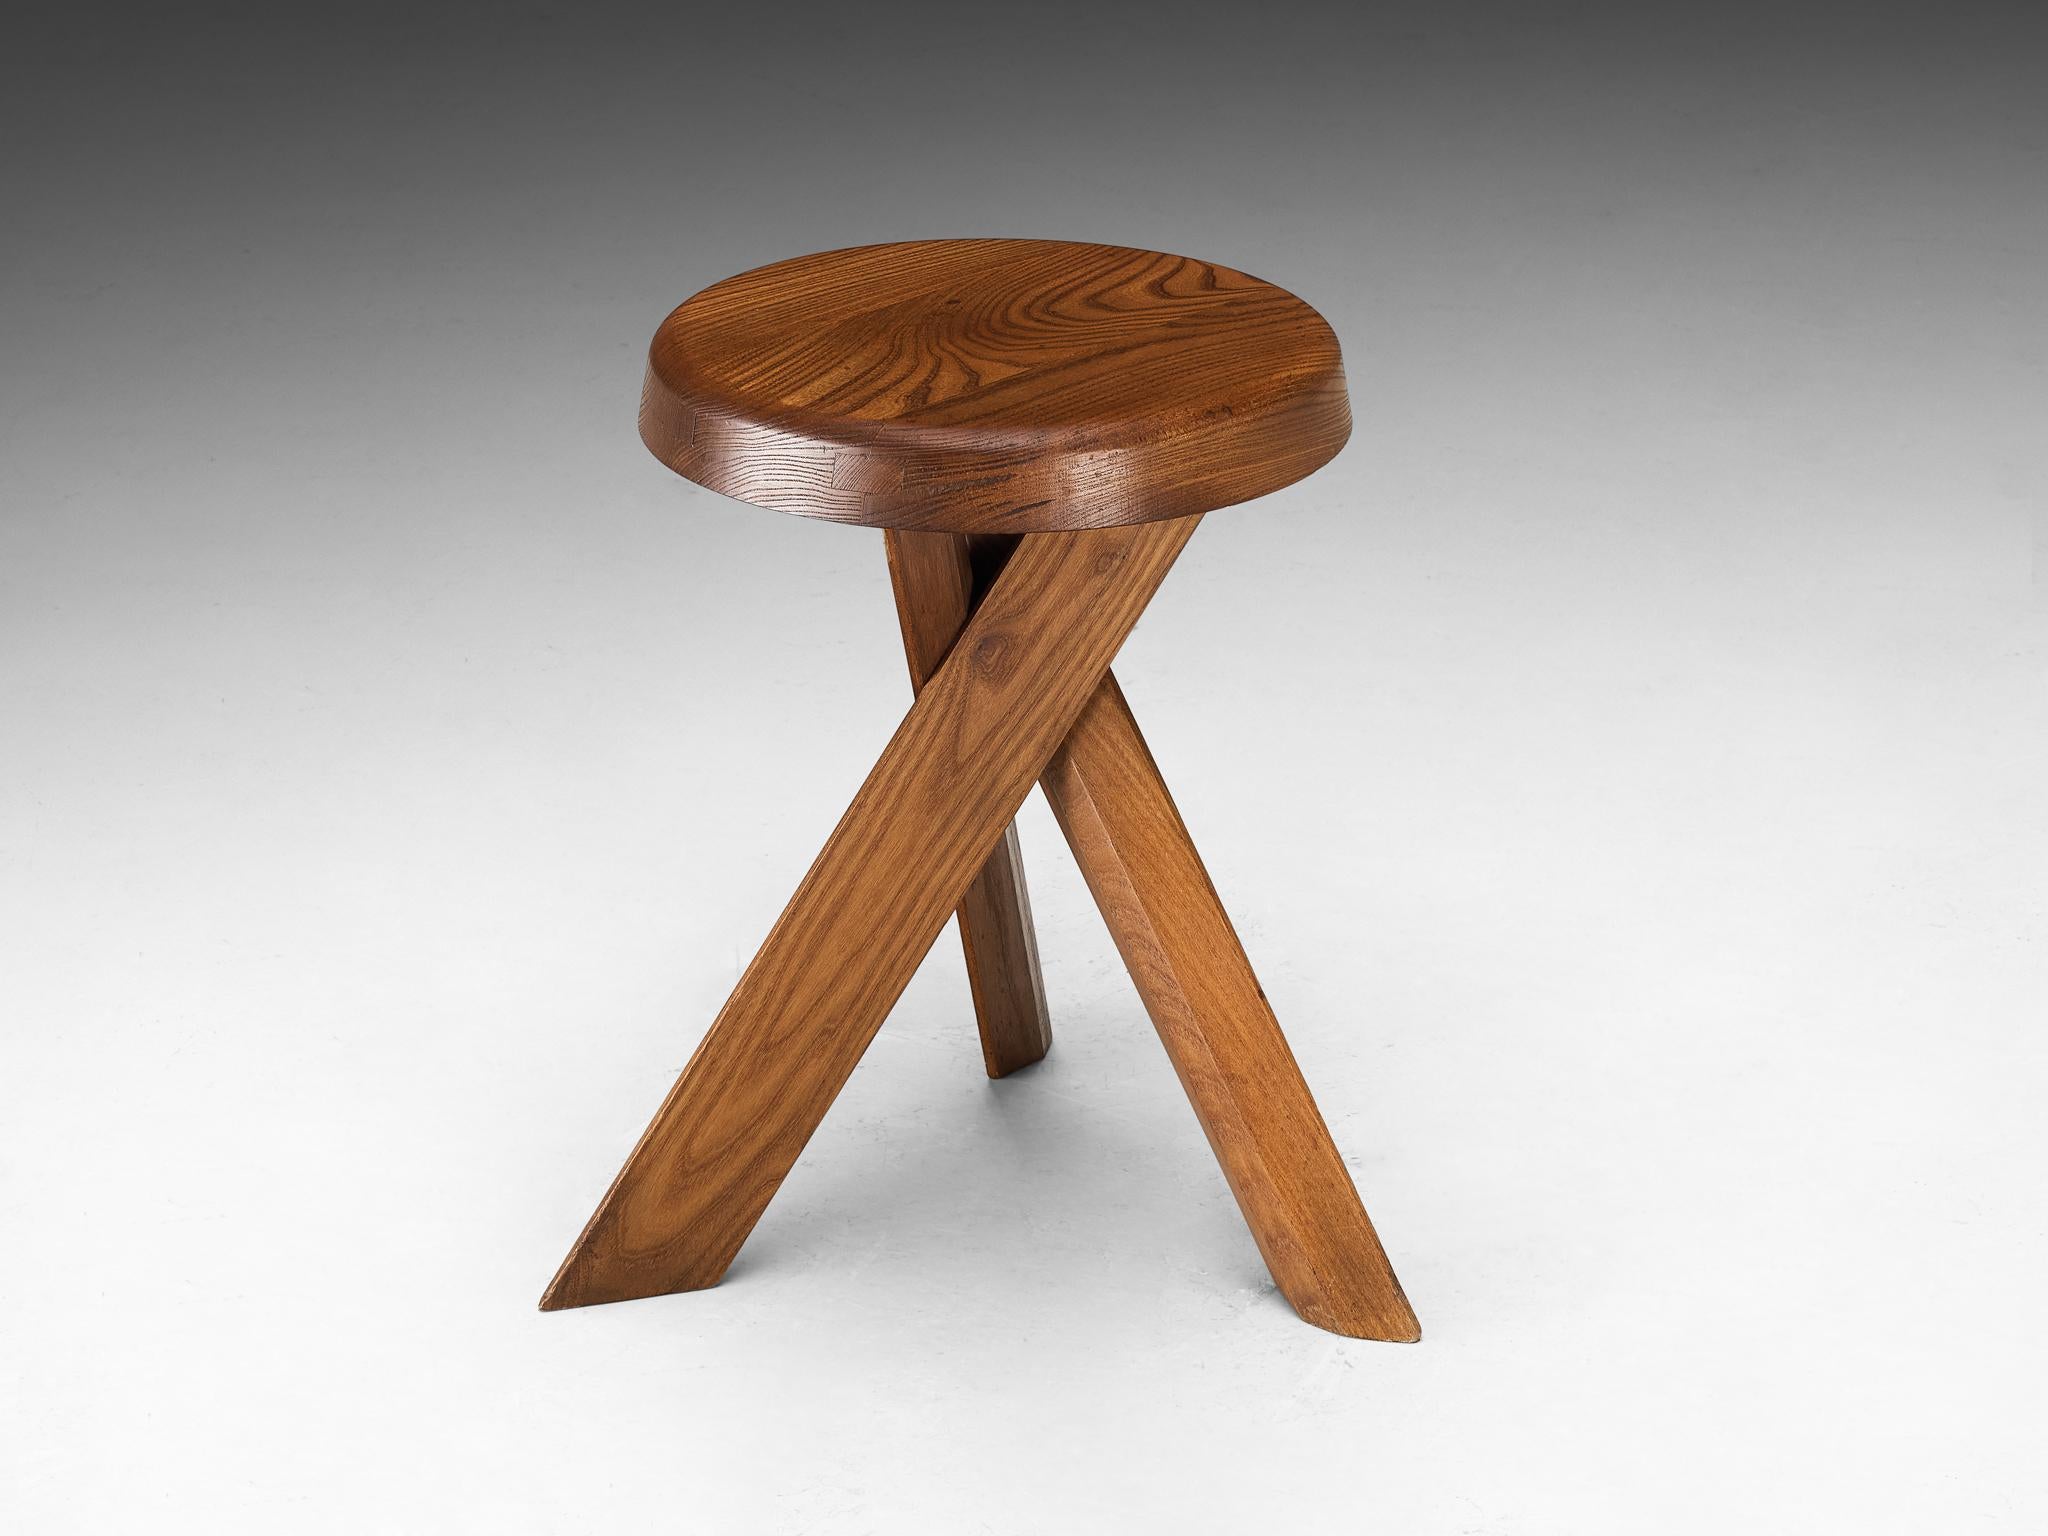 Pierre Chapo, stool, model 'S31A', solid elm, France, circa 1974

This S31A stool is one of the early editions designed by Pierre Chapo, known for his hallmark use of solid elmwood and a commitment to pure and clean design and construction